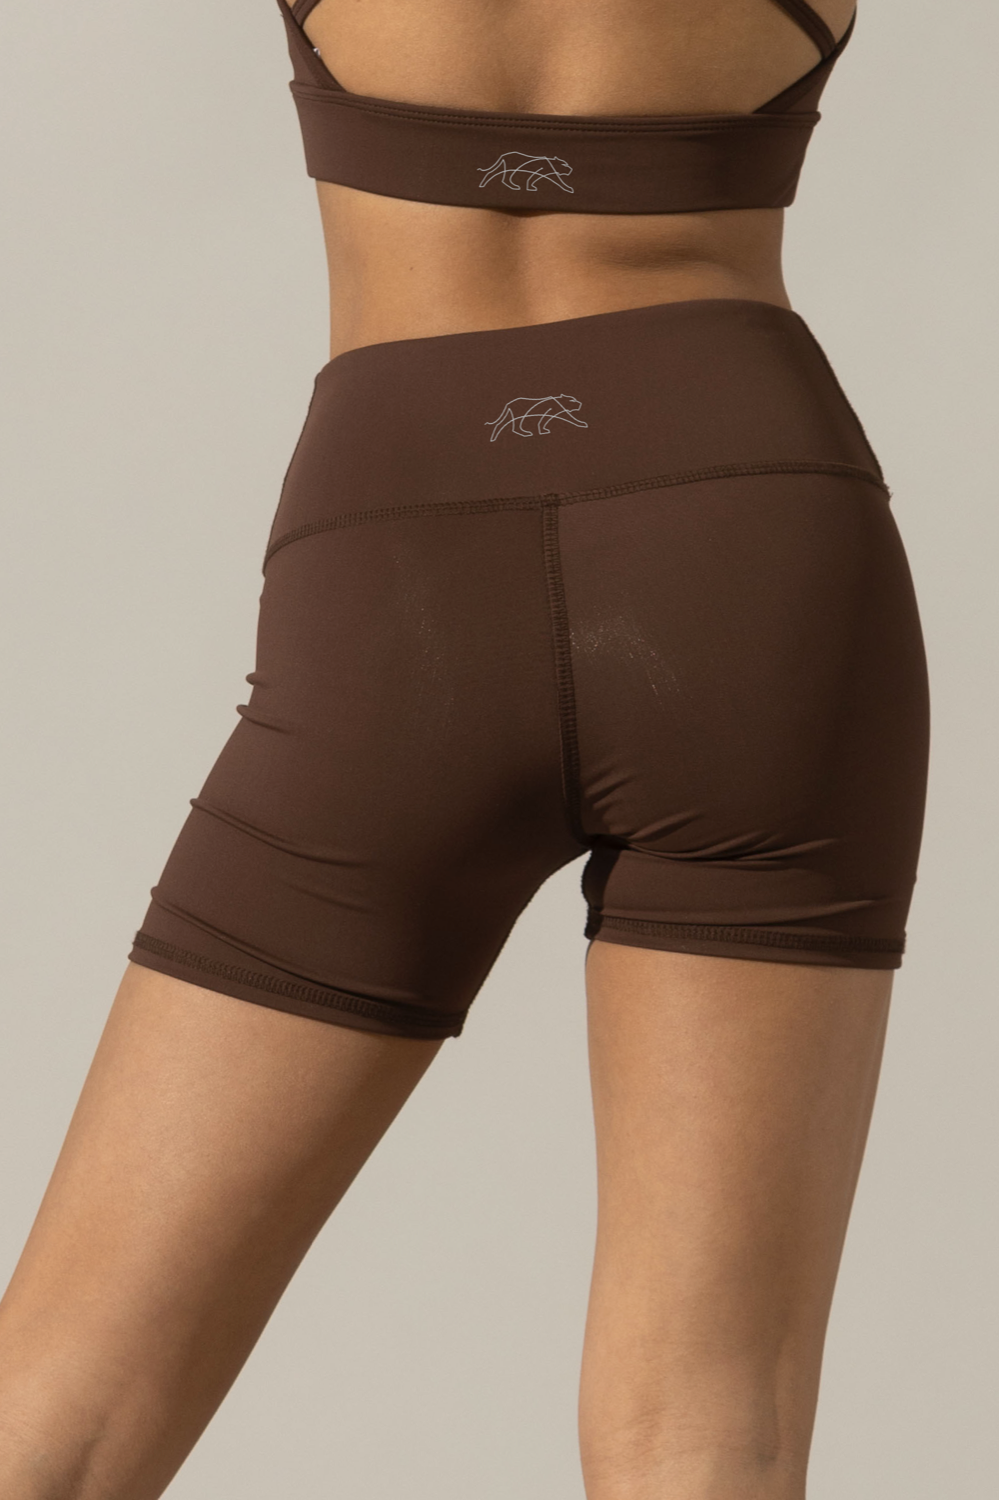 Tiger Friday Online Shop for Triker Shorts - Cocoa Dancewear - View : 5